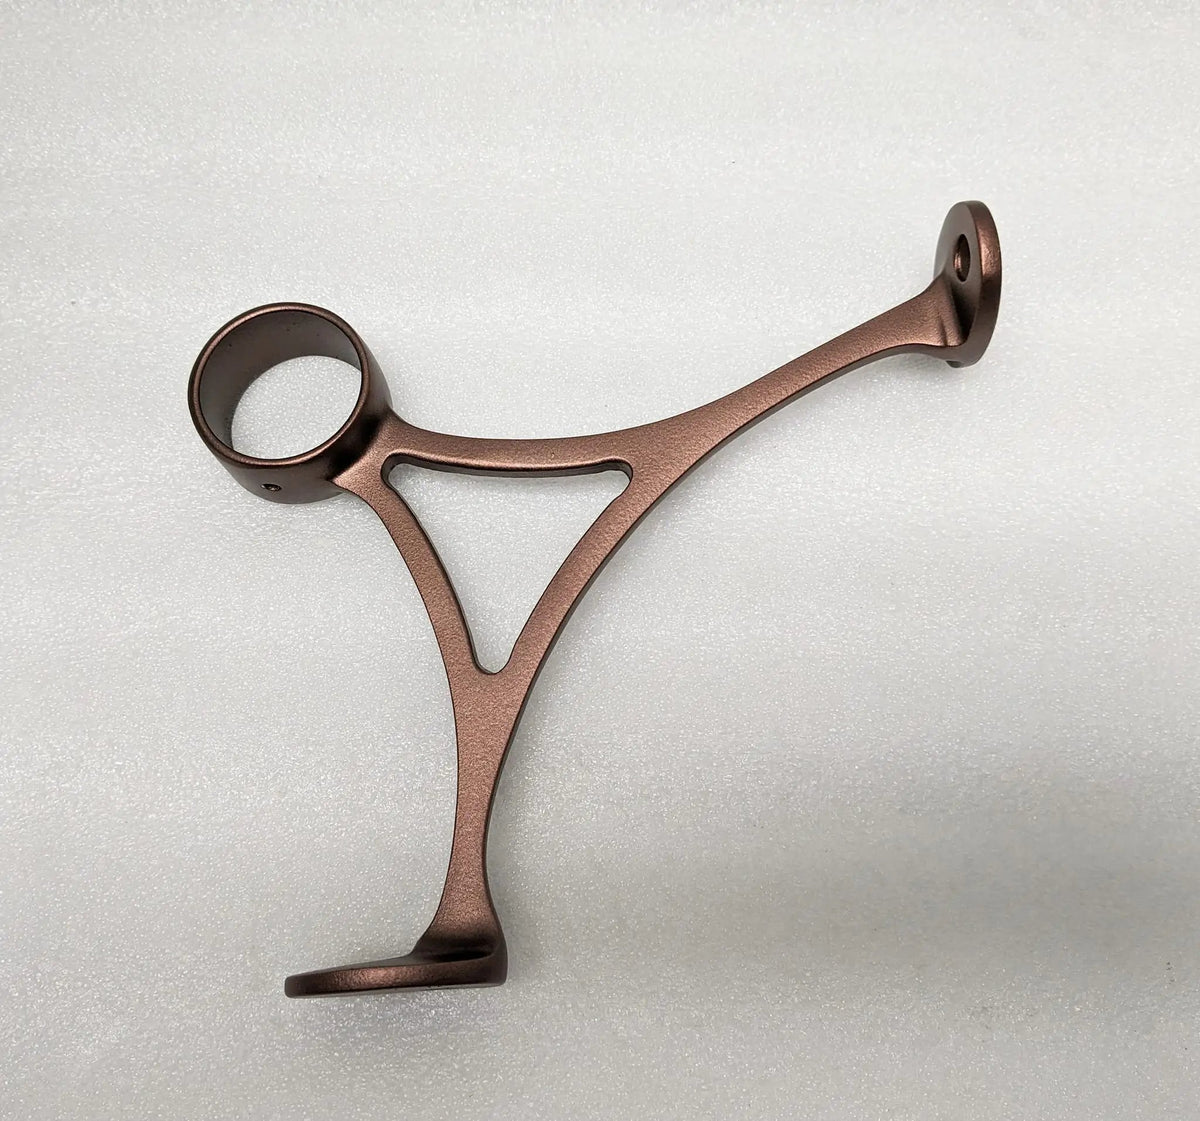 Combination bracket for foot rail with oil rubbed bronze finish